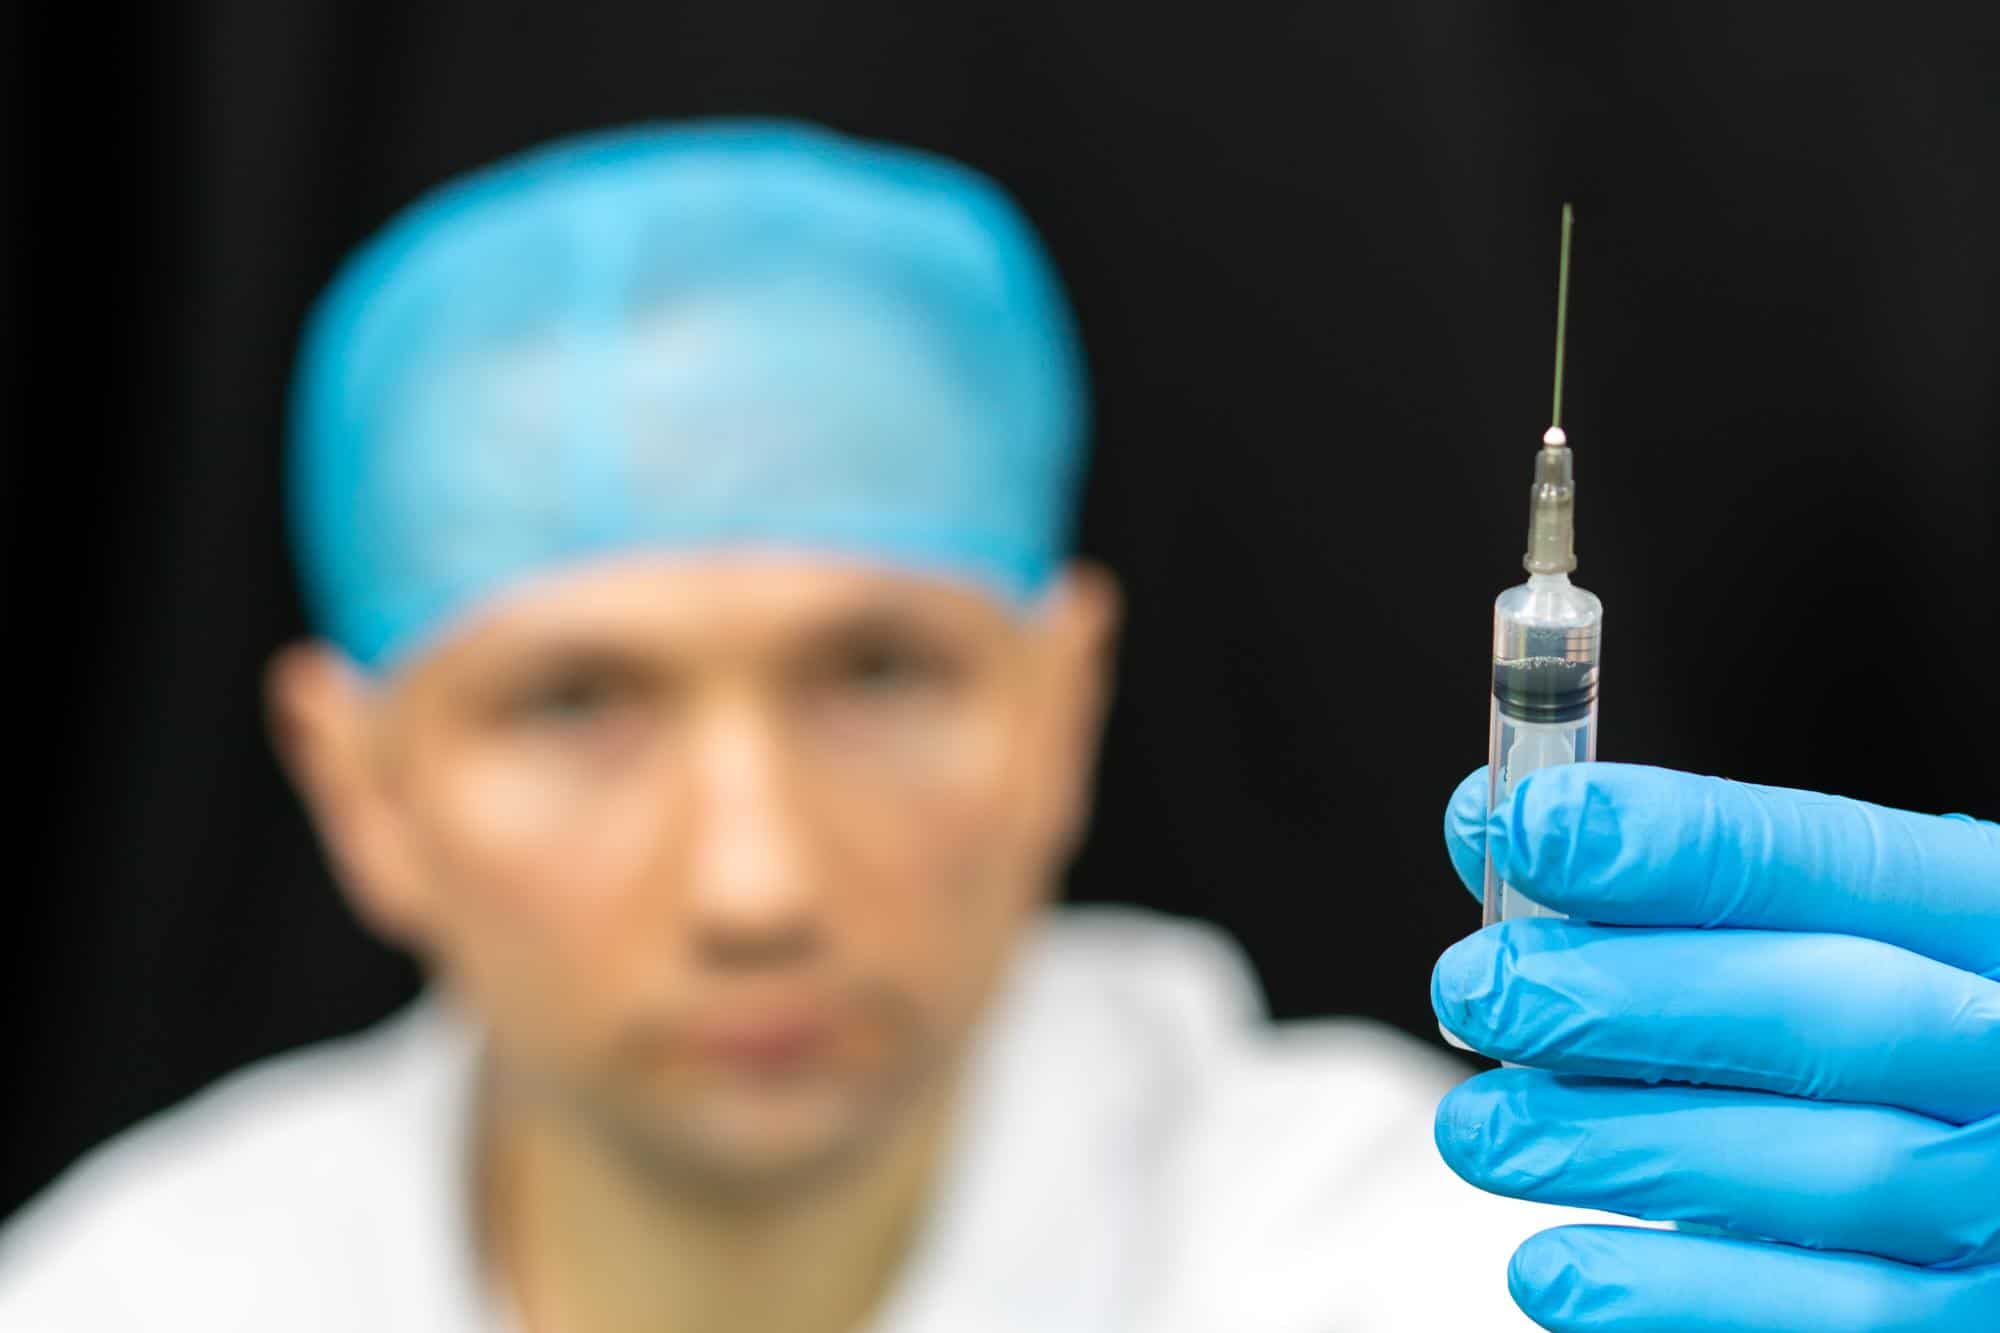 A doctor holds up a syringe and checks the dosage before proceeding with the treatment.